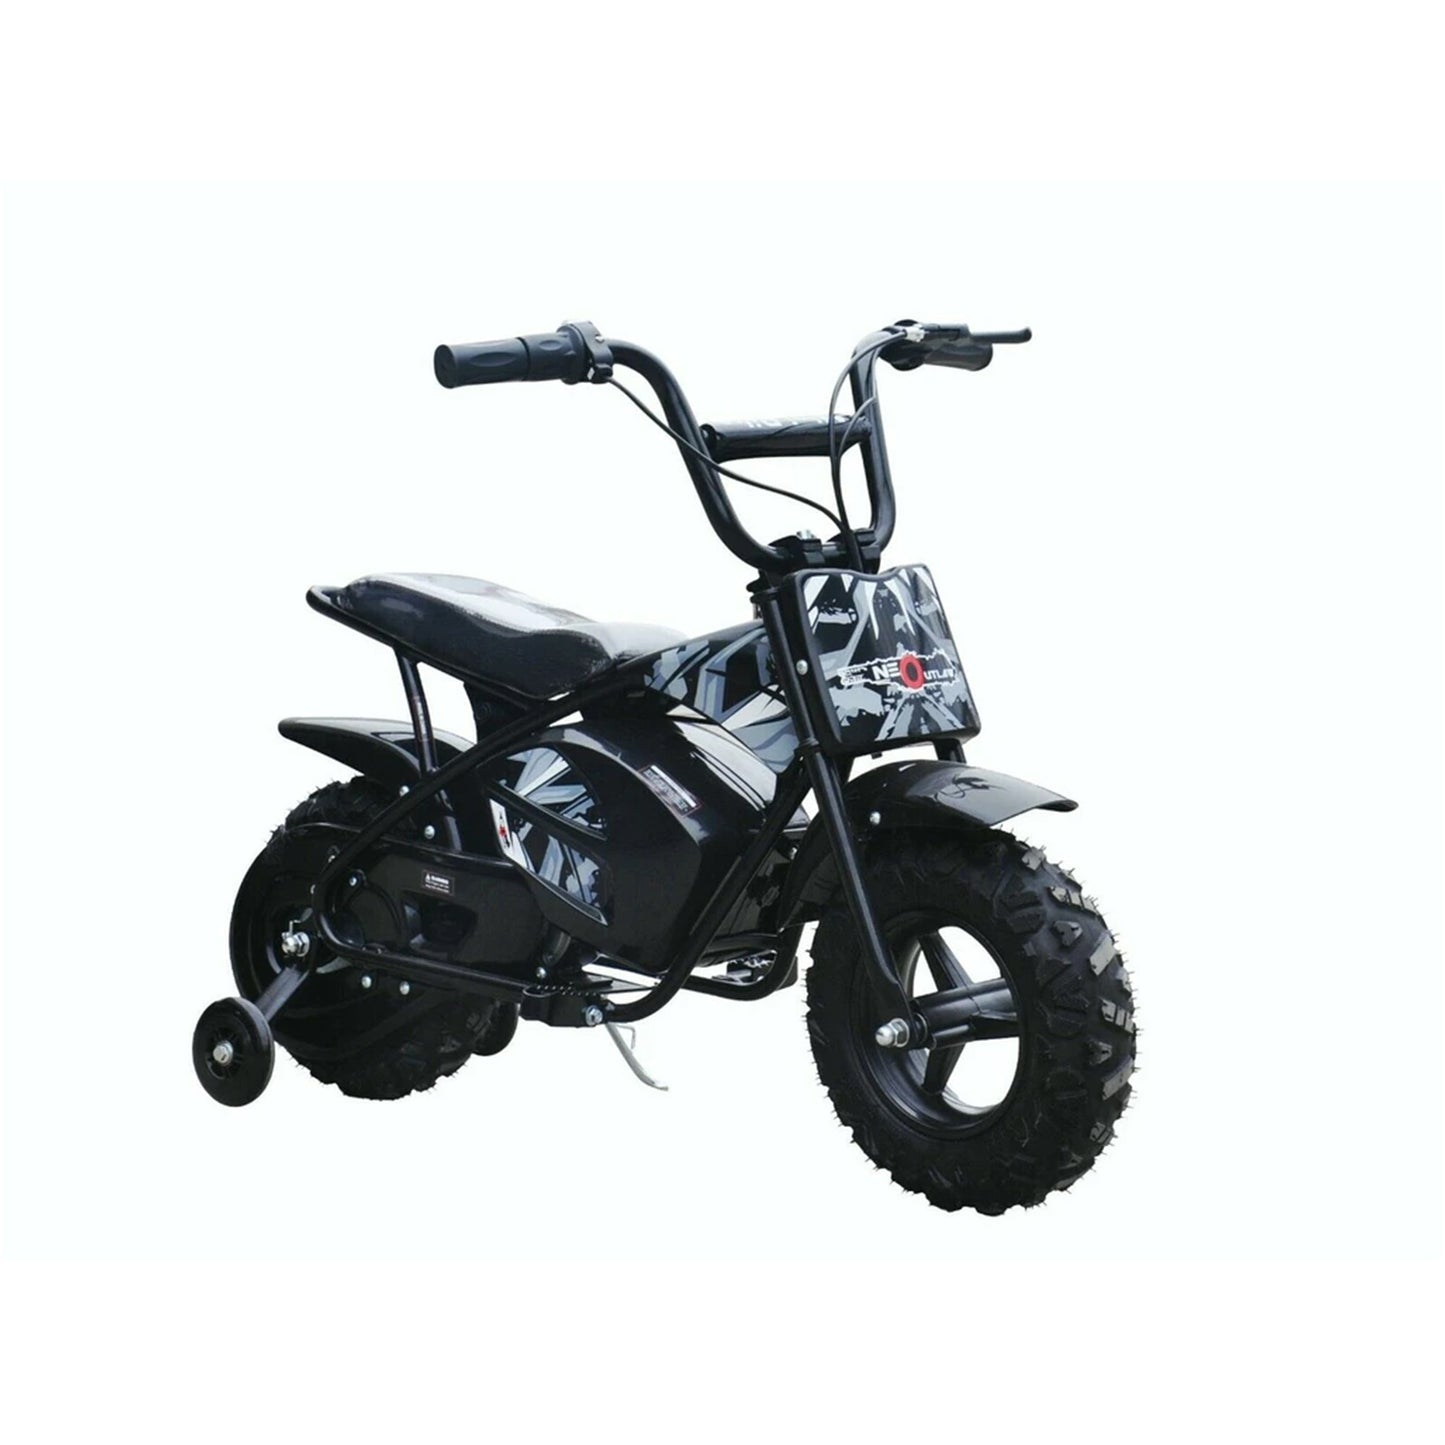 "Electric Mini Moto Dirt Bike for Kids with Twist and Go Throttle on White Background"